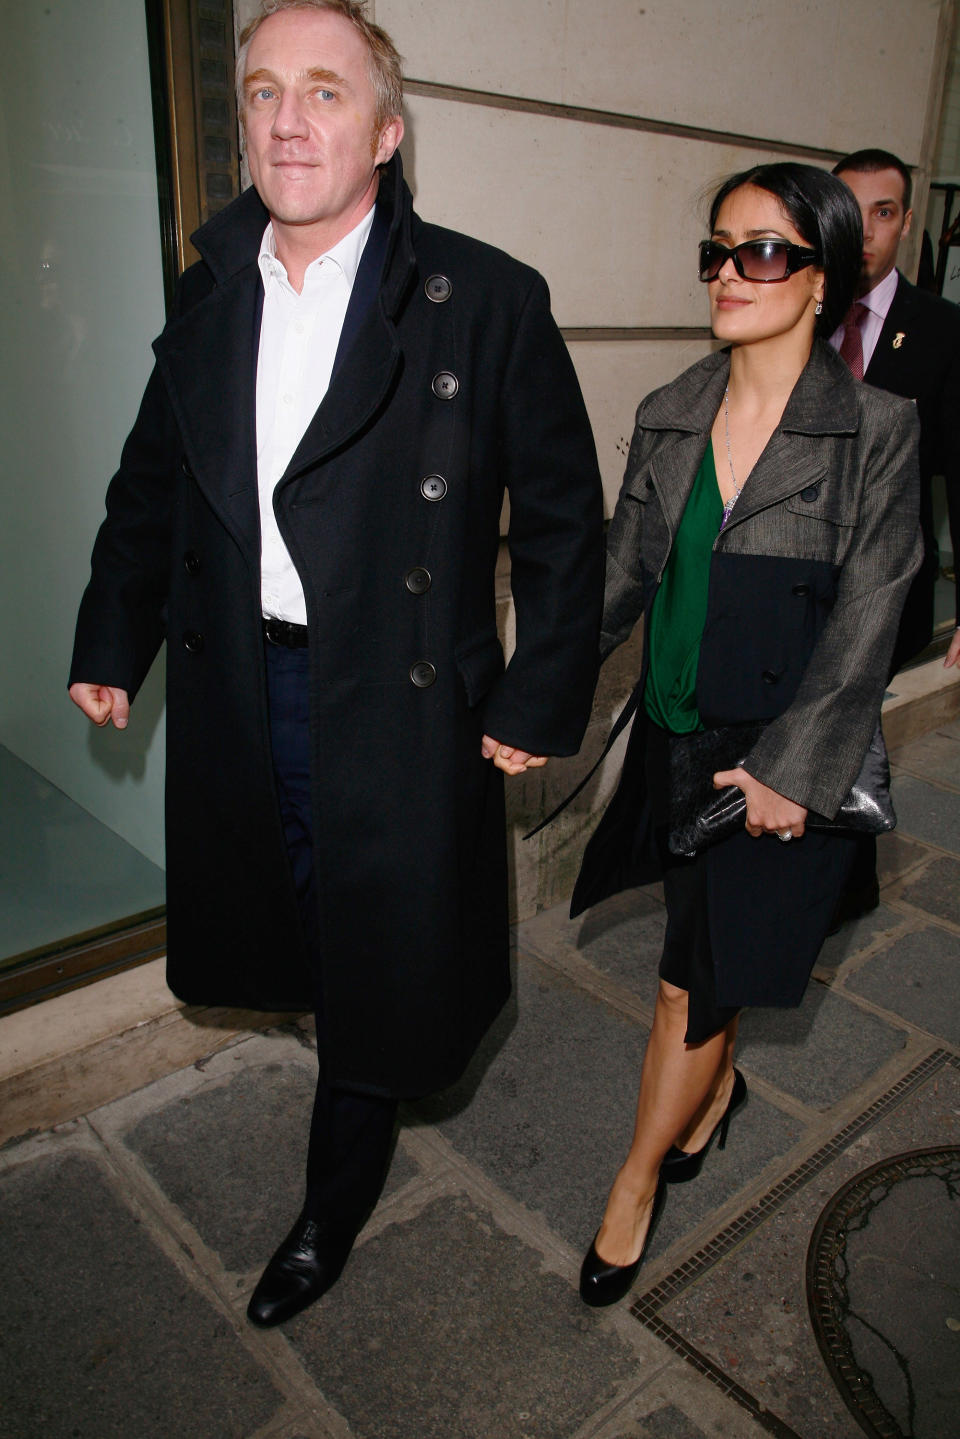 PARIS - MARCH 05:  Francois-Henri Pinault and Salma Hayek leave the Balenciaga Ready-to-Wear A/W 2009 fashion show during Paris Fashion Week on March 5, 2009 in Paris, France.  (Photo by Julien Hekimian/WireImage)